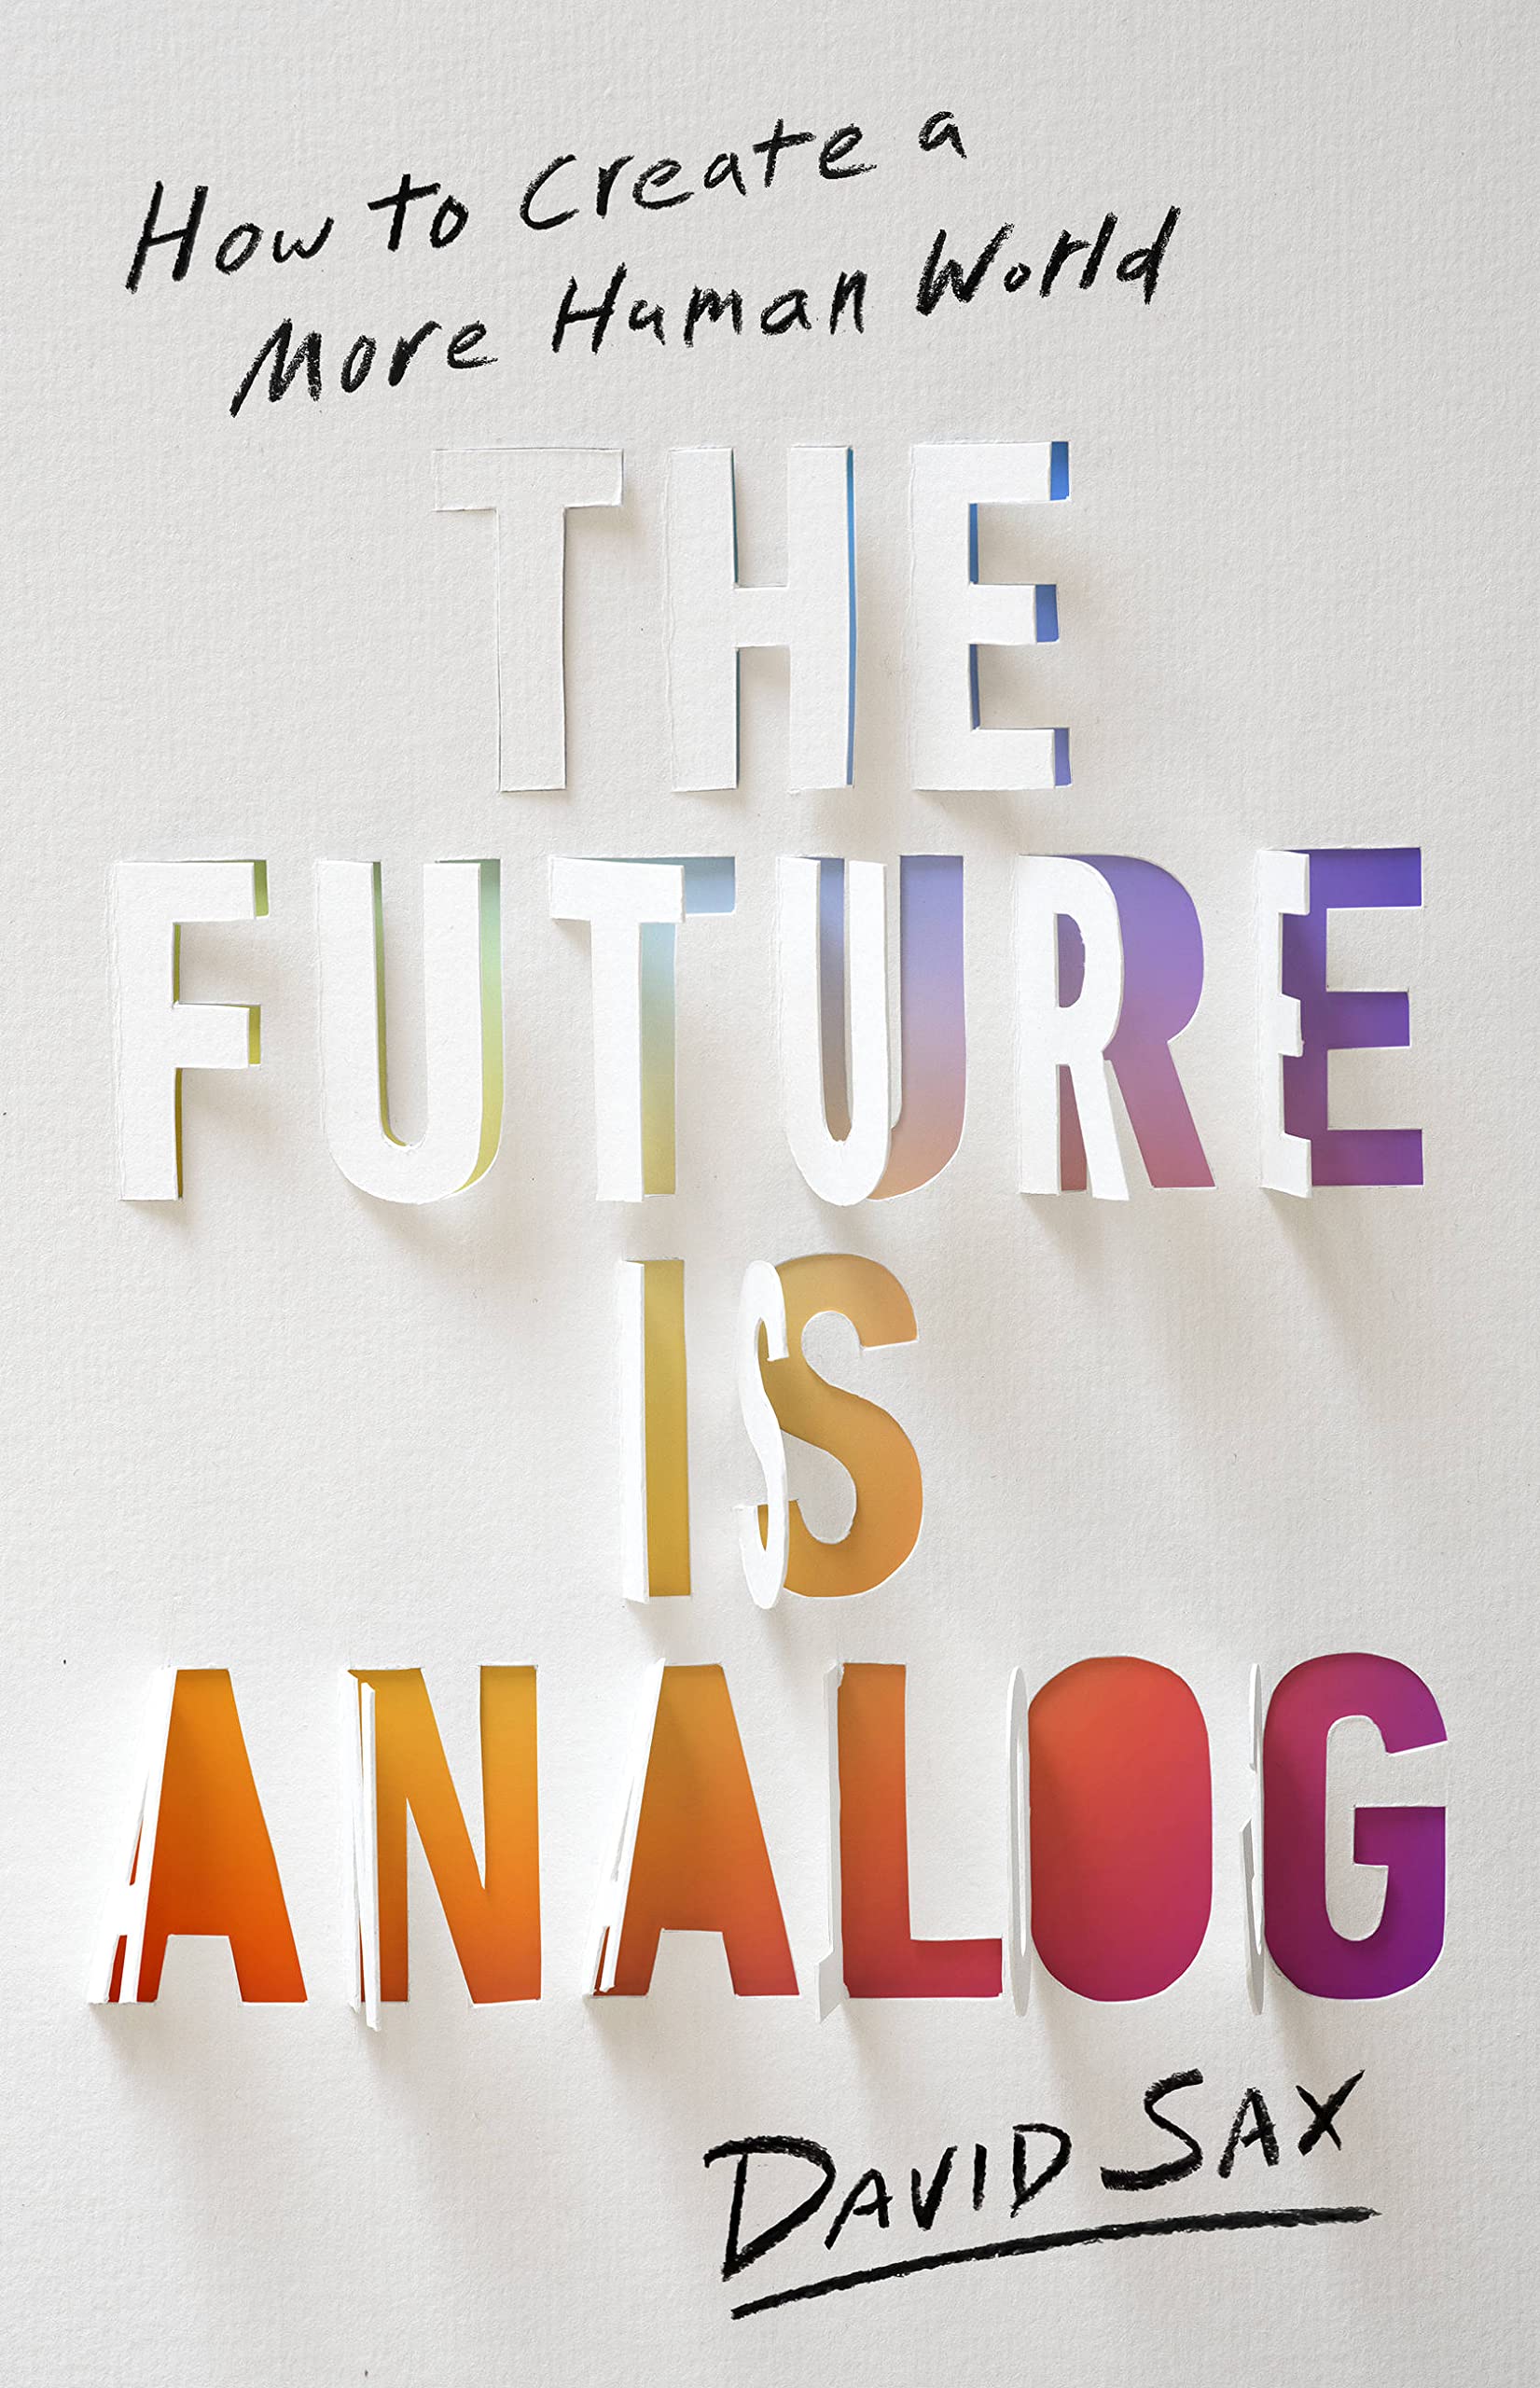 David Sax's The Future is Analog book cover